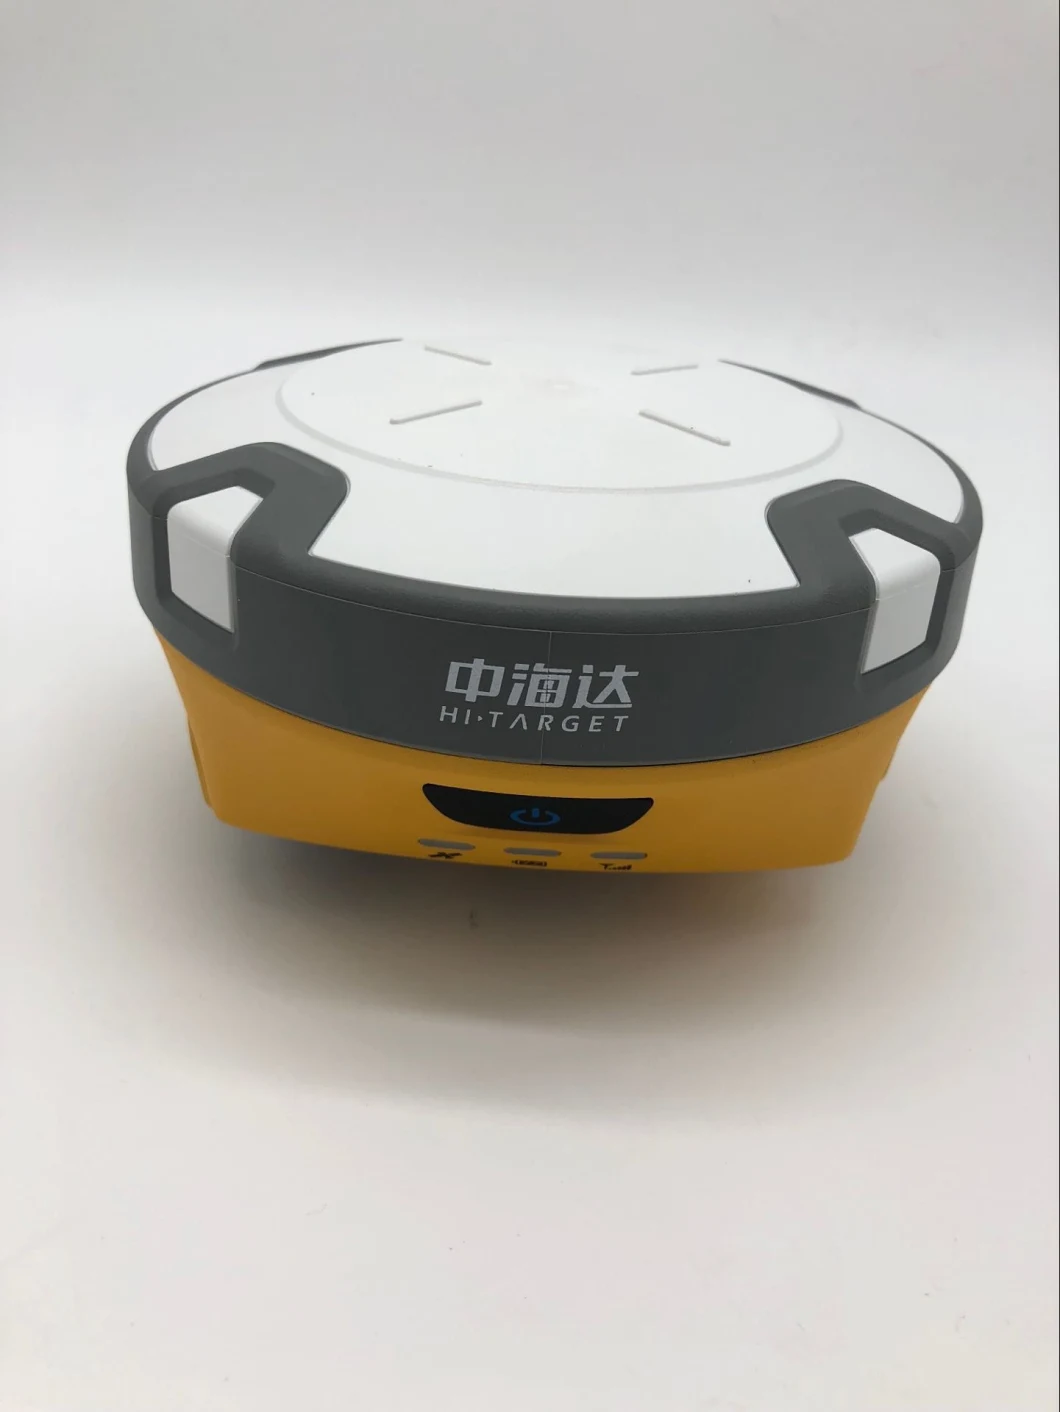 Rtk Gnss Receiver V90 High-Precision Trimble Board Android Rtk Receiver GPS Receiver